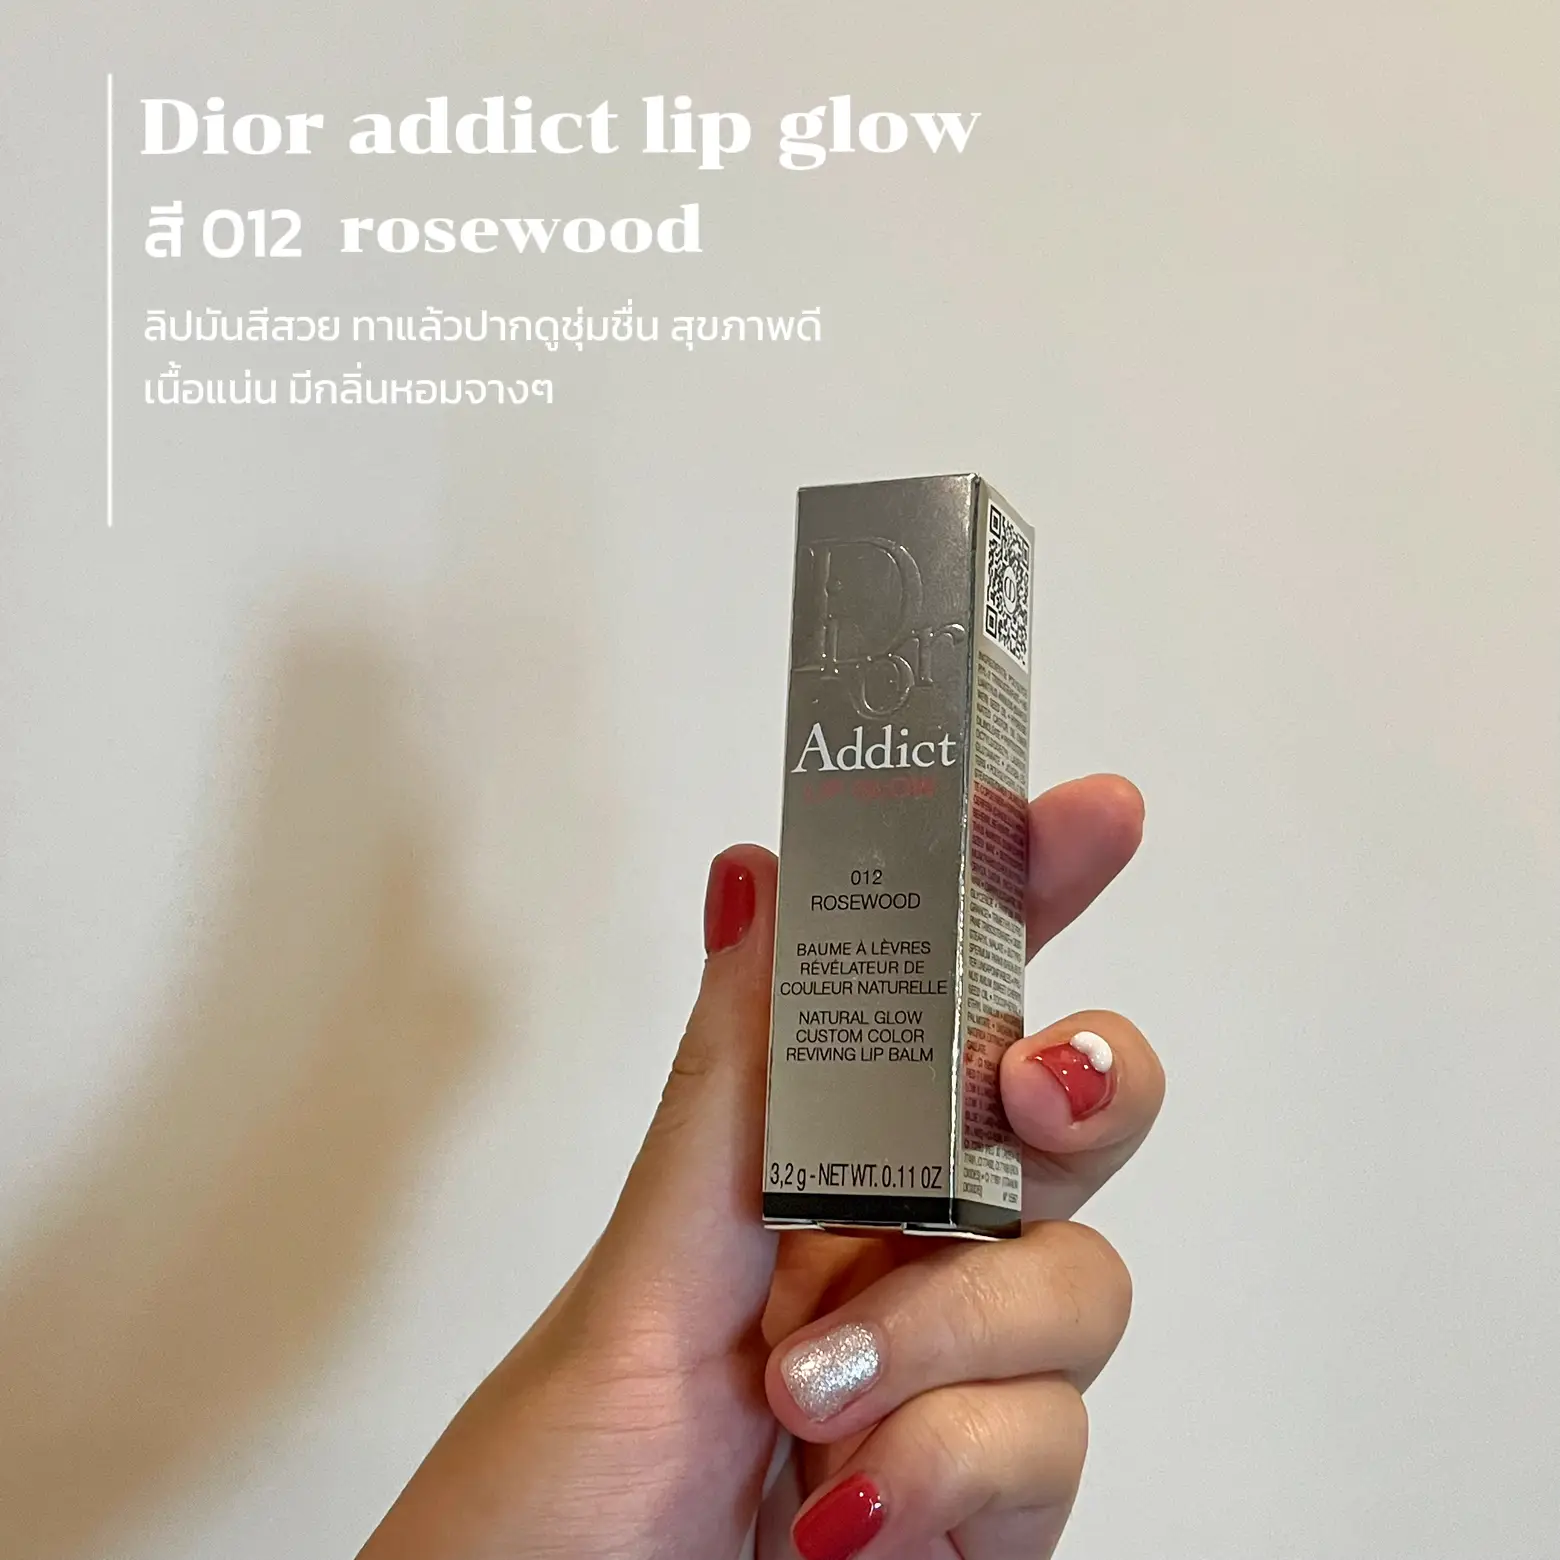 posted addict glow badboyminwa lip rosewood Lemon8 Gallery review 012 color dior | lip | by